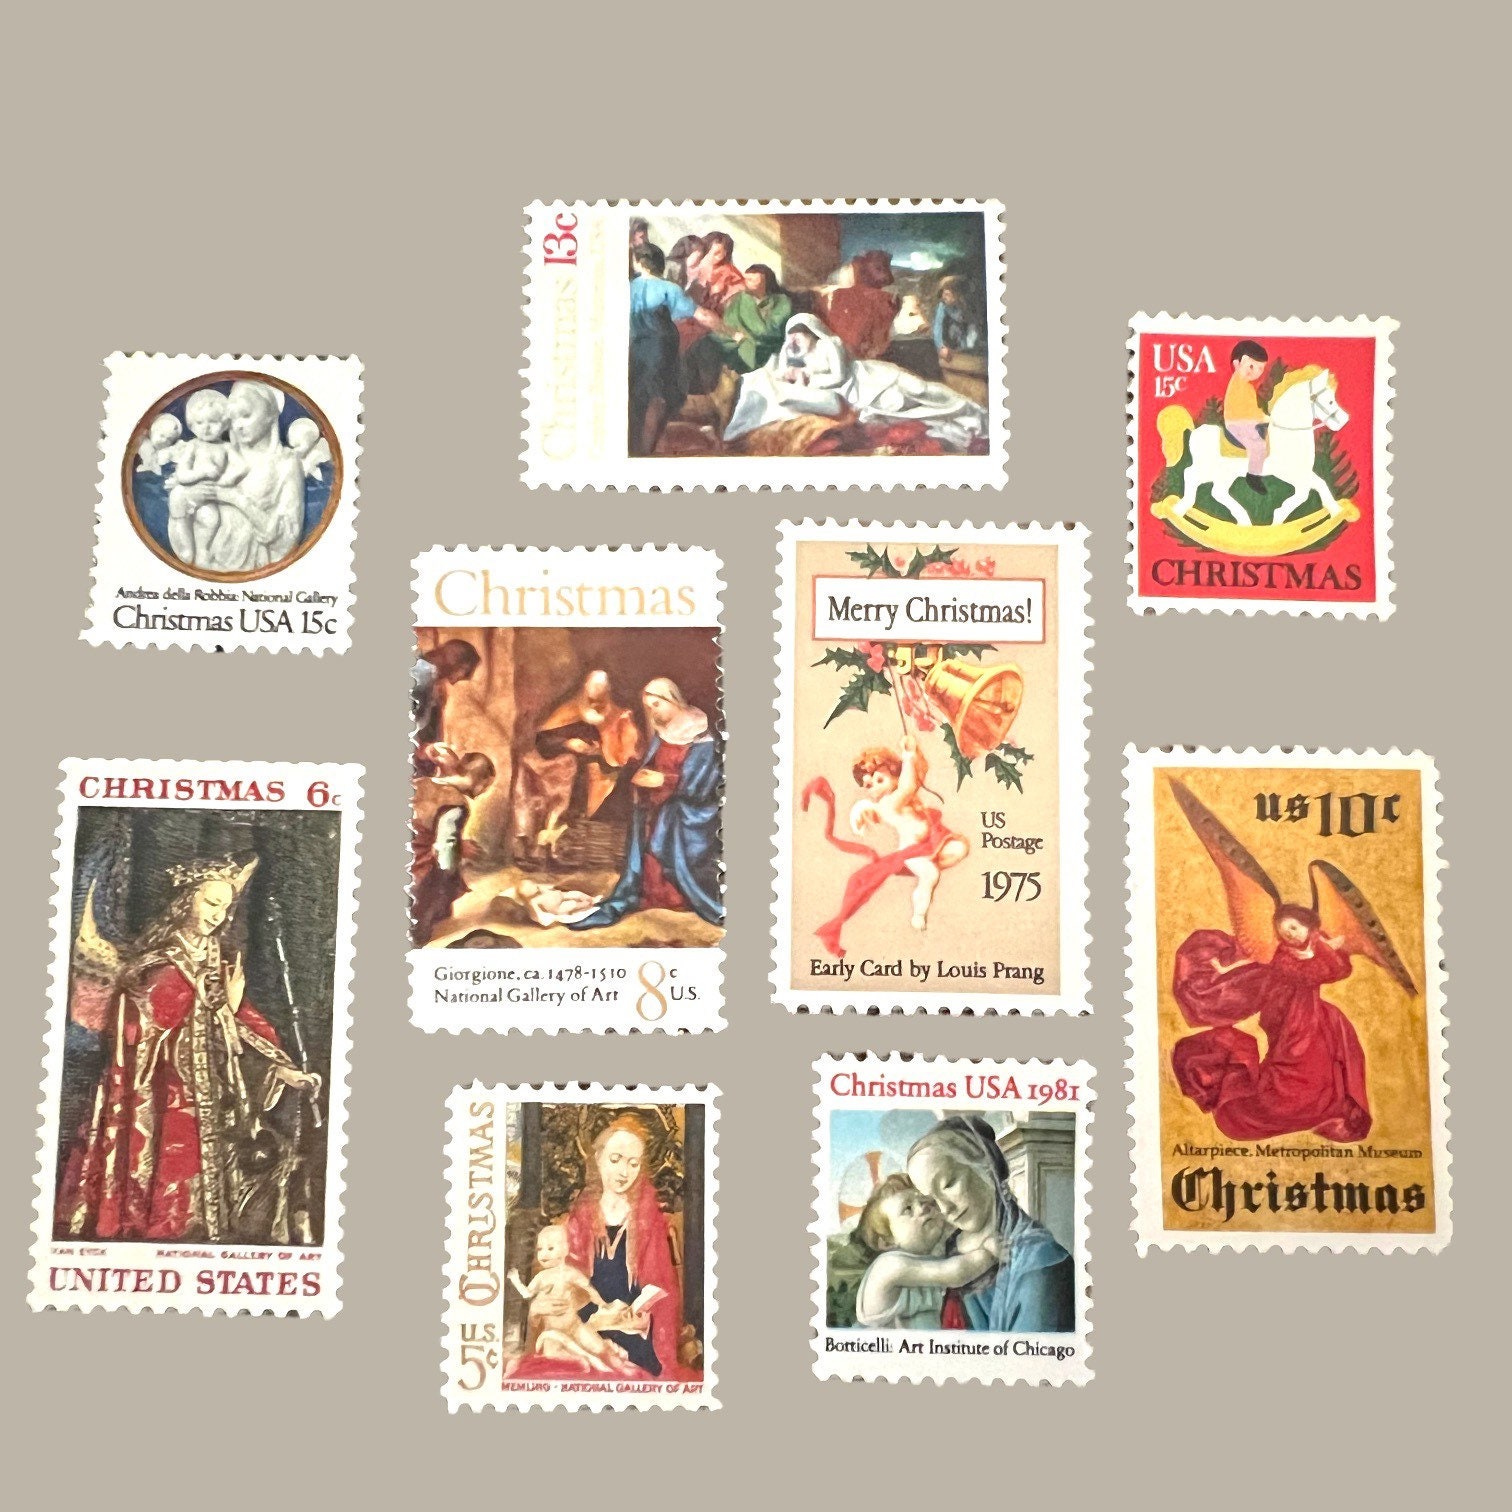 New Stamps issued in 2023 - Mail, stamps & postal info - Postcrossing  Community